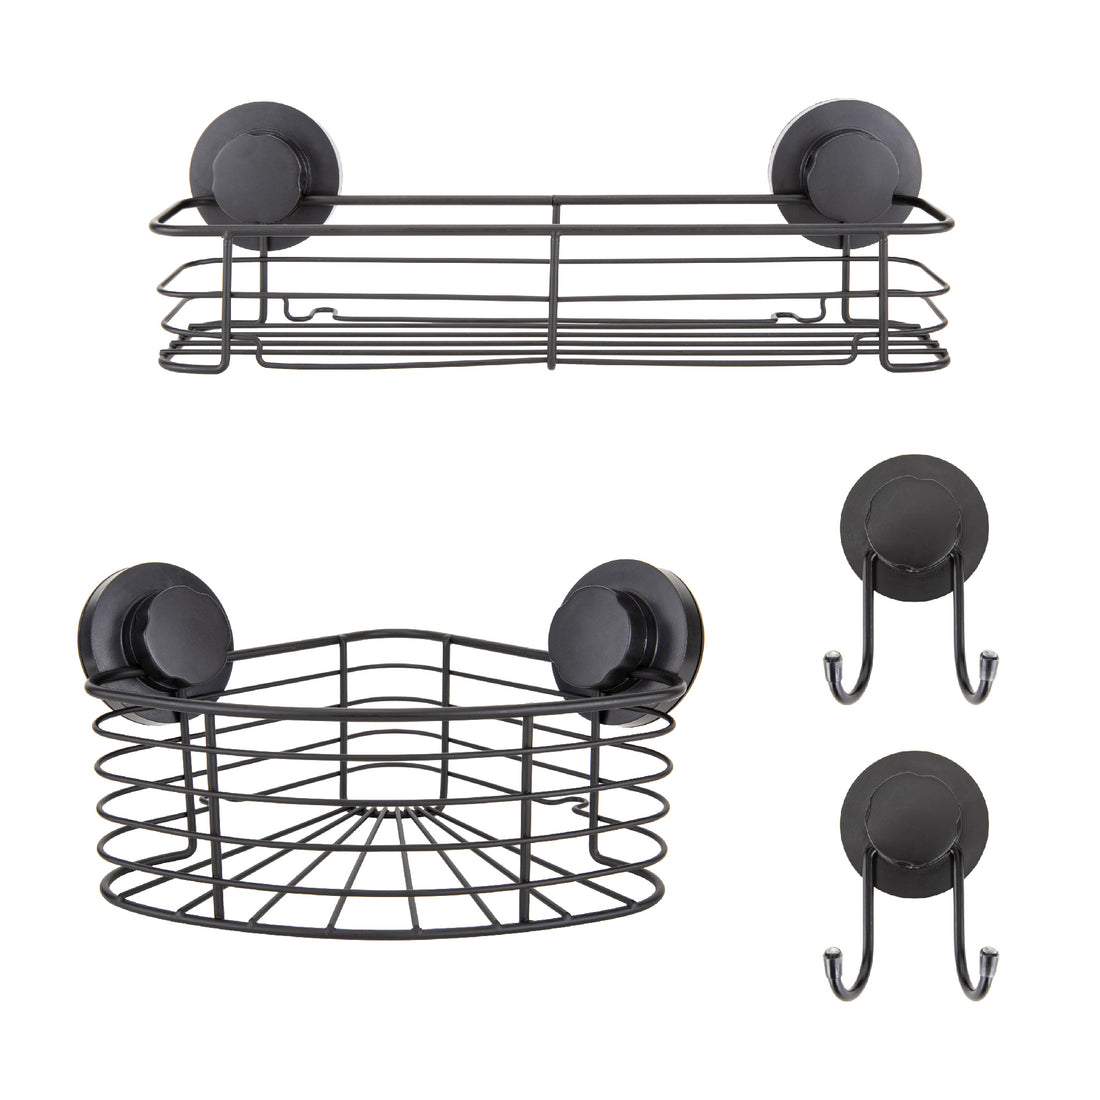 White Suction Cup Corner Shower Caddy